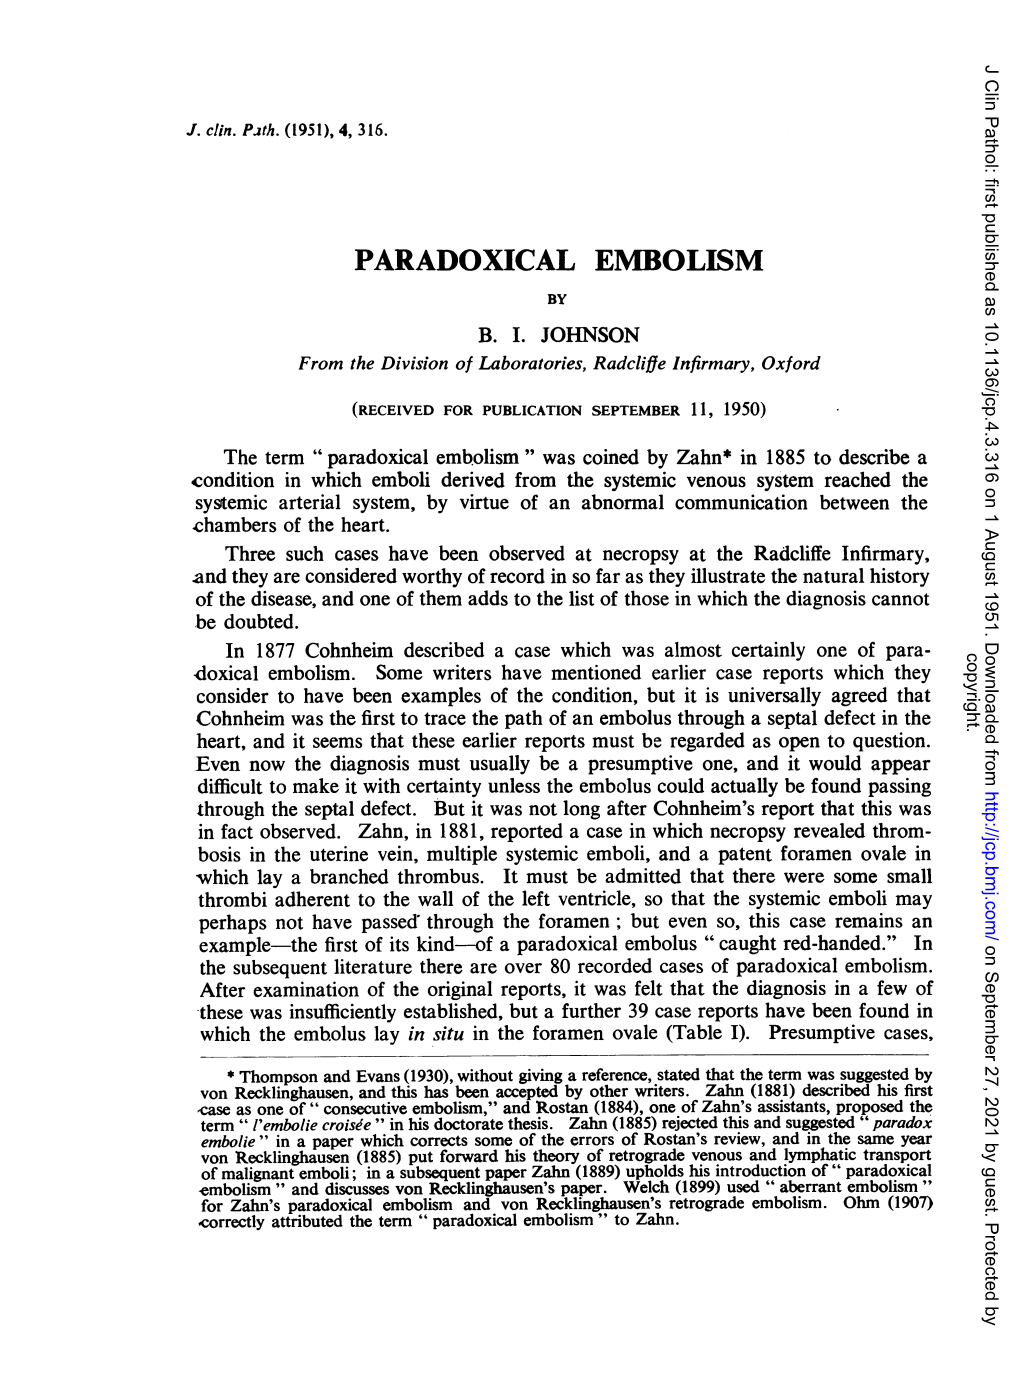 Paradoxical Embolism by B